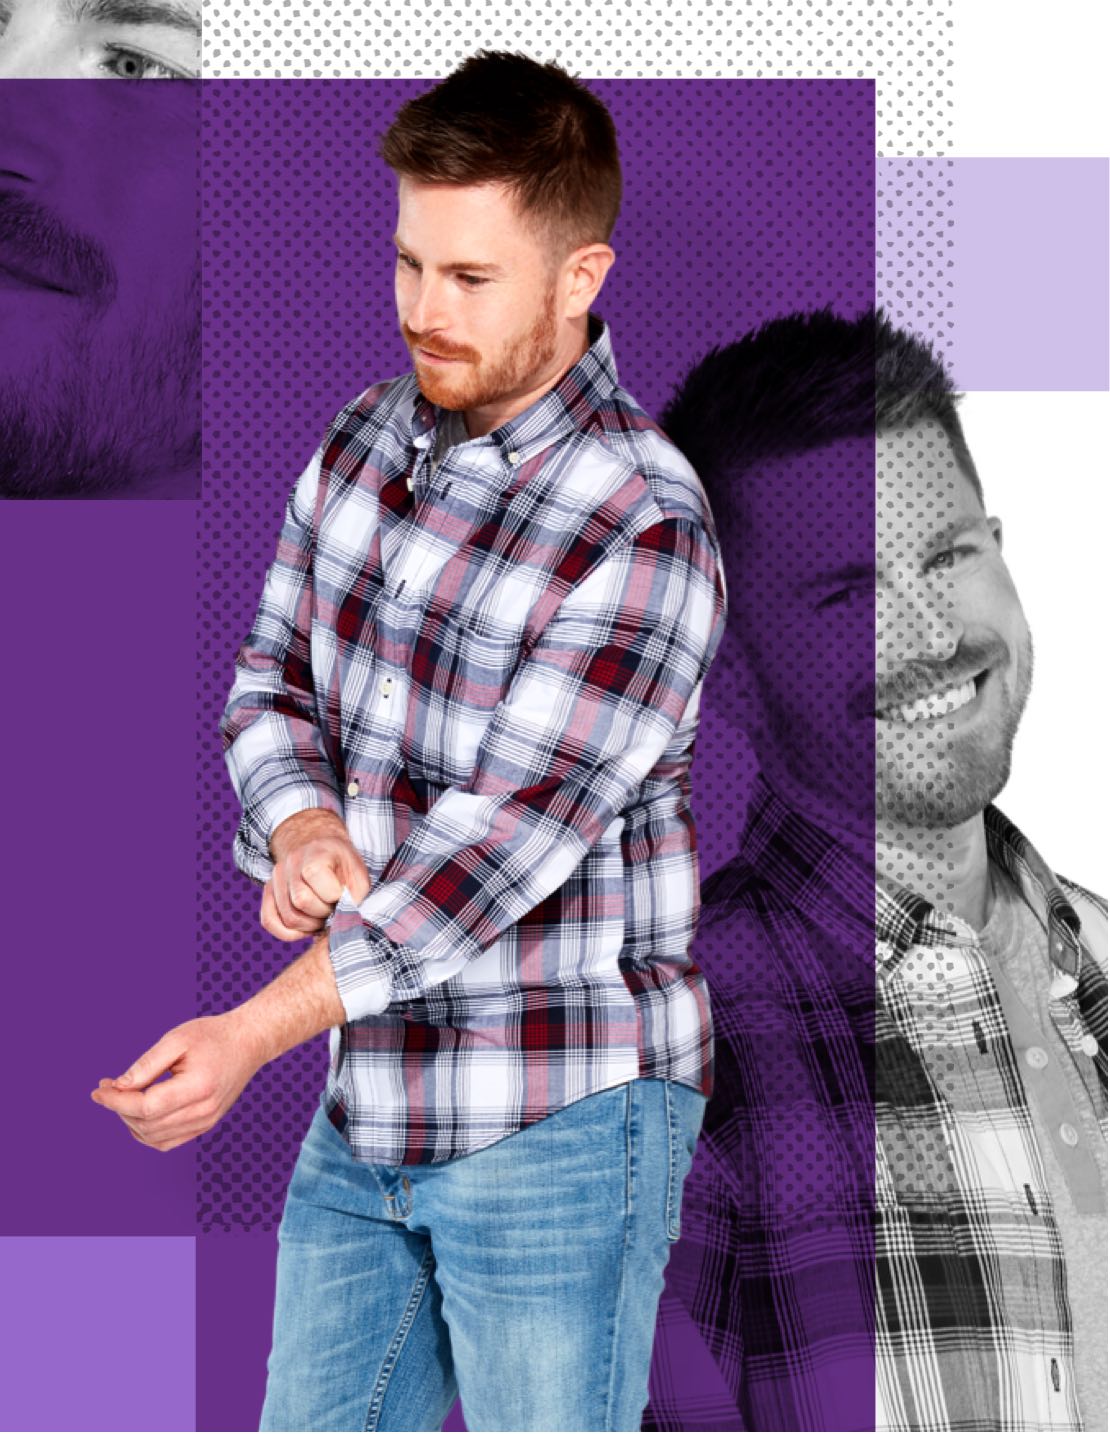 A smiling man wearing a plaid shirt on a purple background.